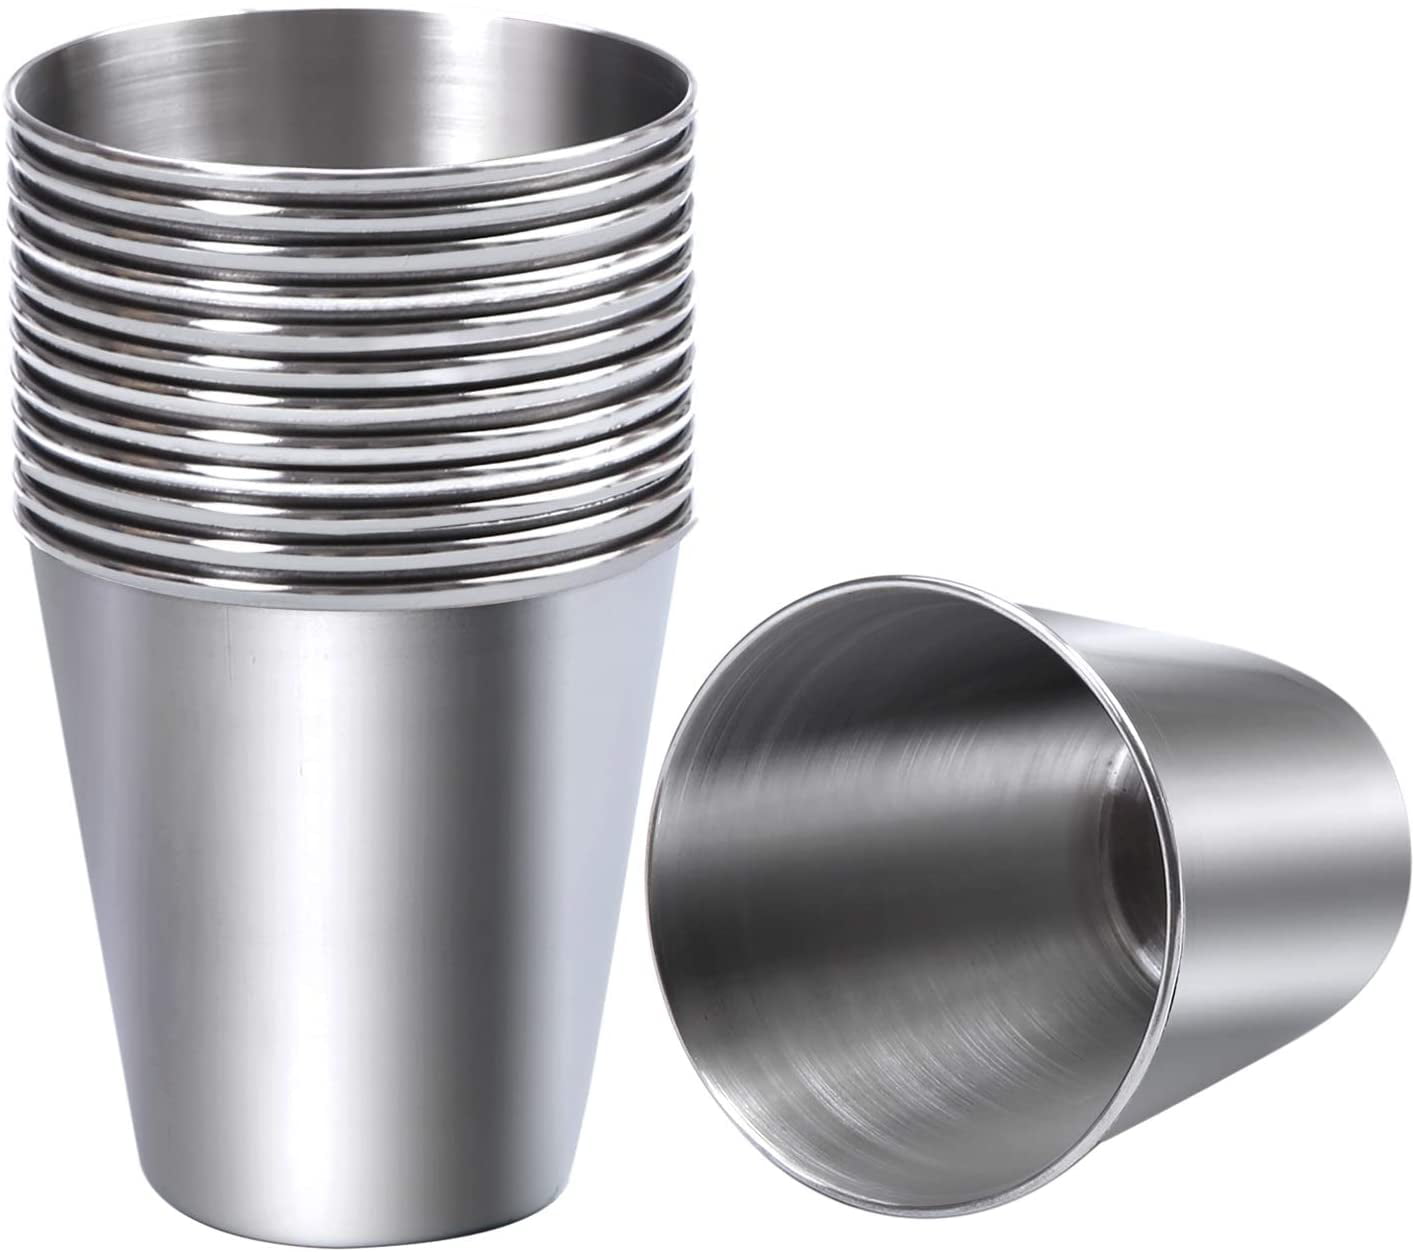 evebel 12 Pieces Stainless Steel Shot Cups Stainless Steel Shot Glass Drinking Tumbler 2.3 Ounce/70 ml 